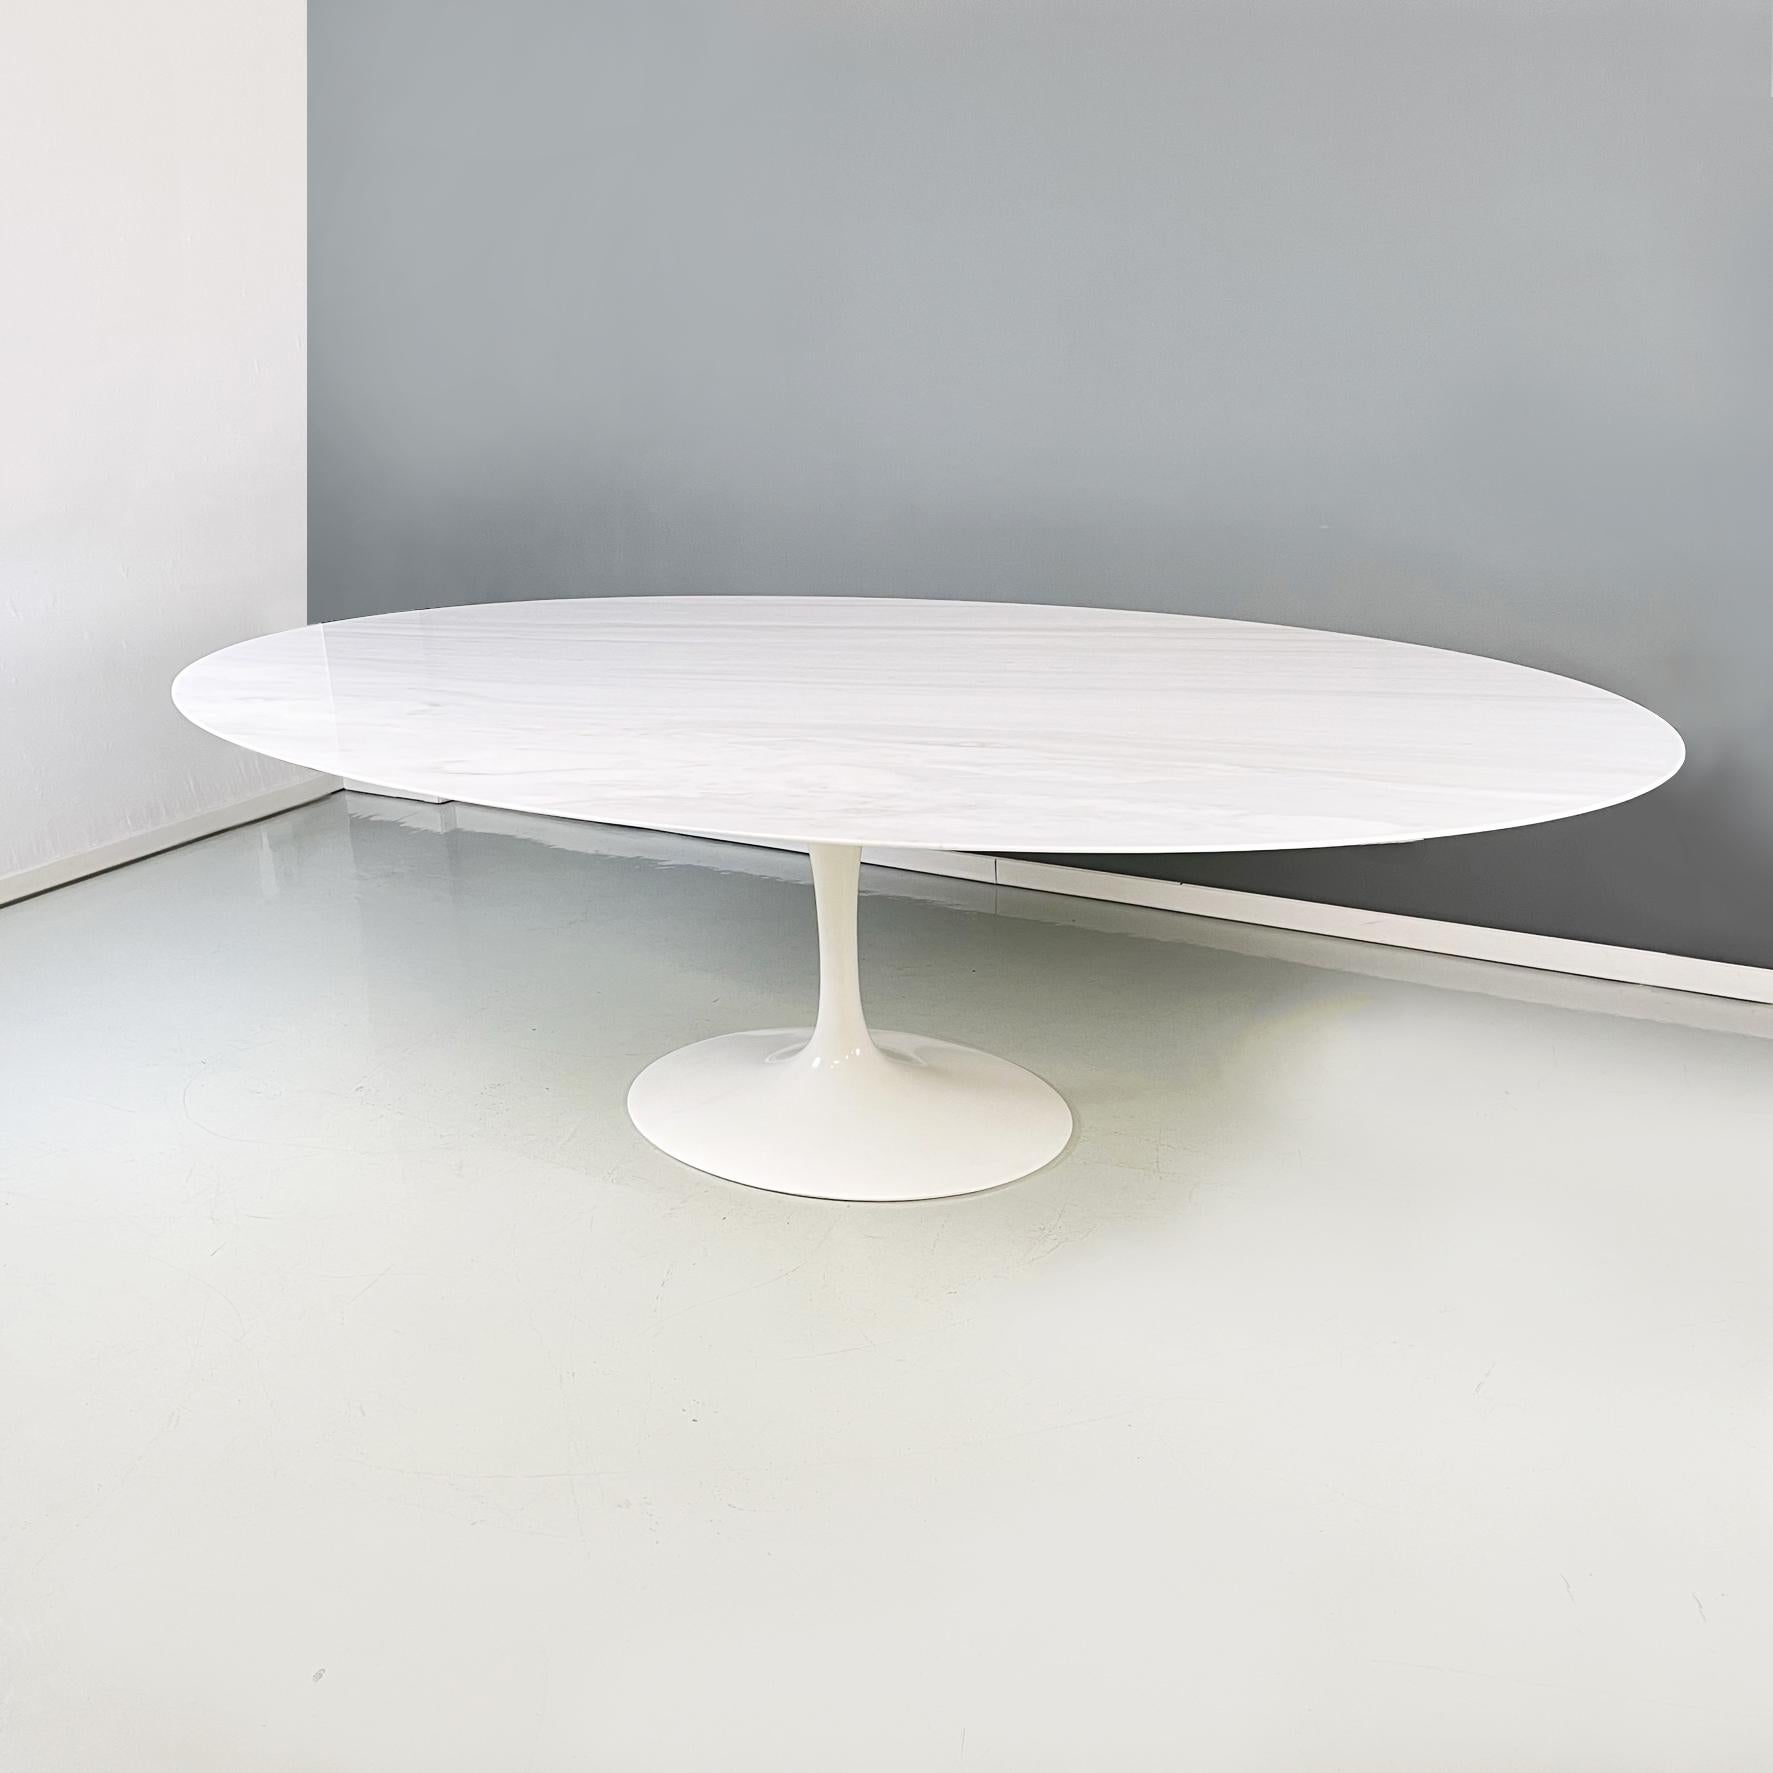 American Usa Modern Oval Marble Dining Table Mod. Tulip by Eero Saarinen for Knoll, 1970s